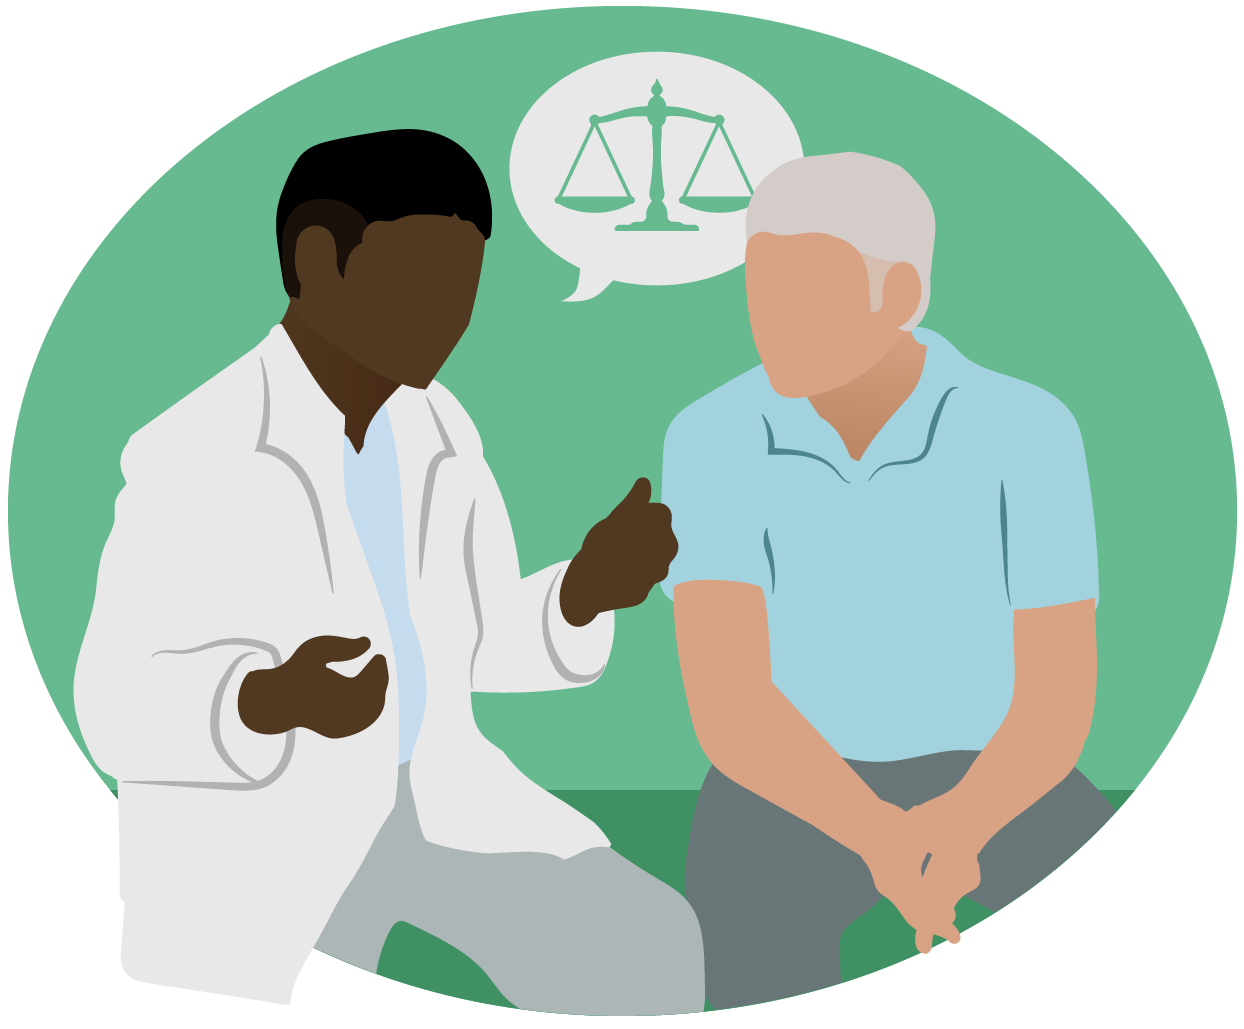 An illustration of a doctor talking with a patient about health equity